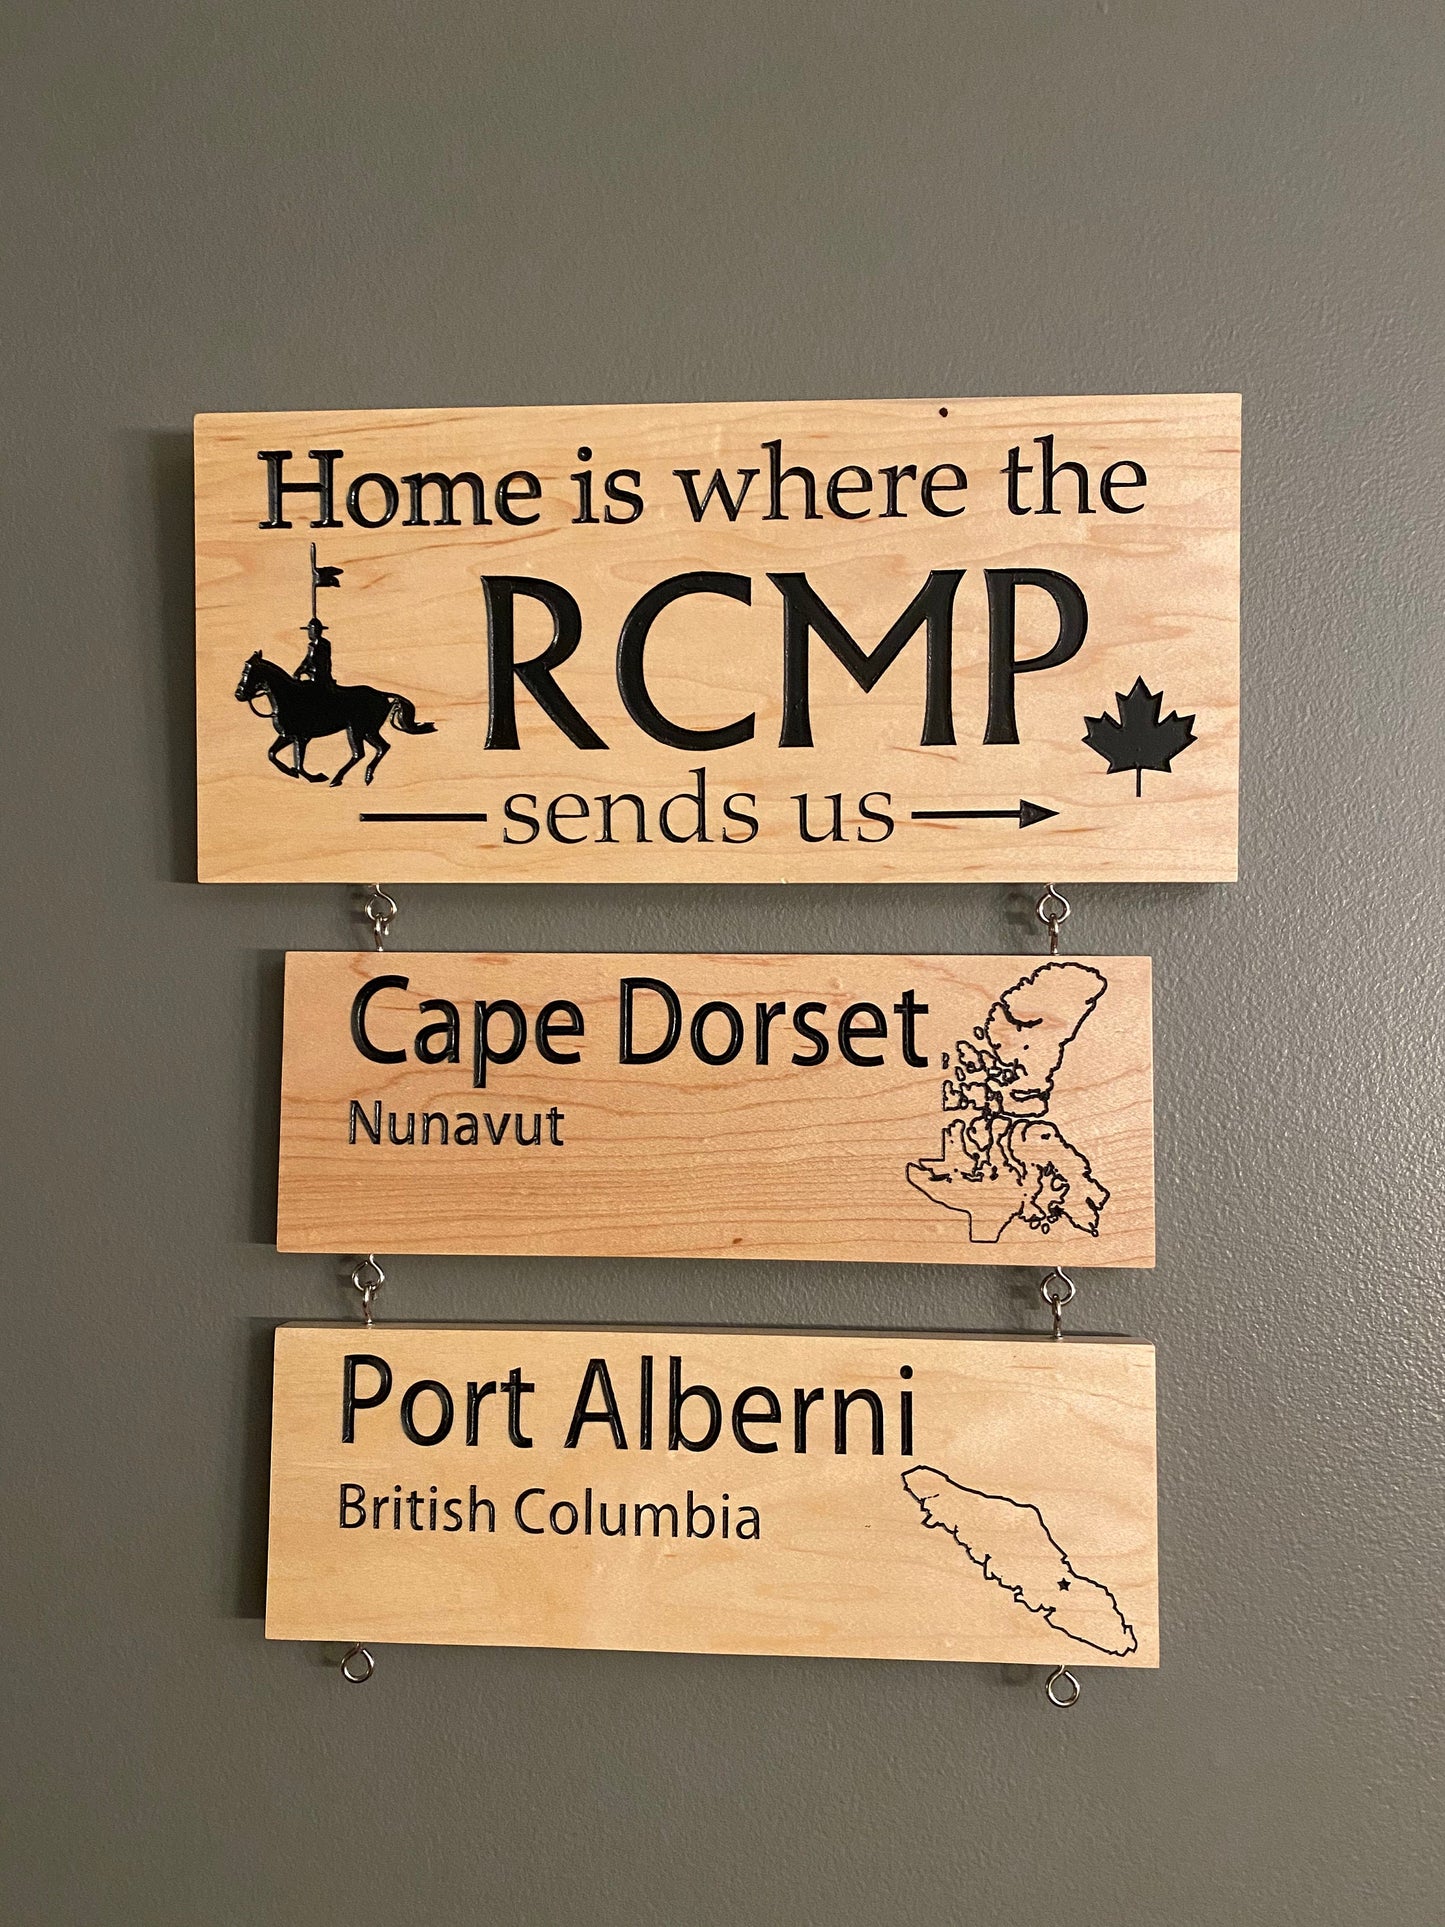 Home is Where the RCMP sends us